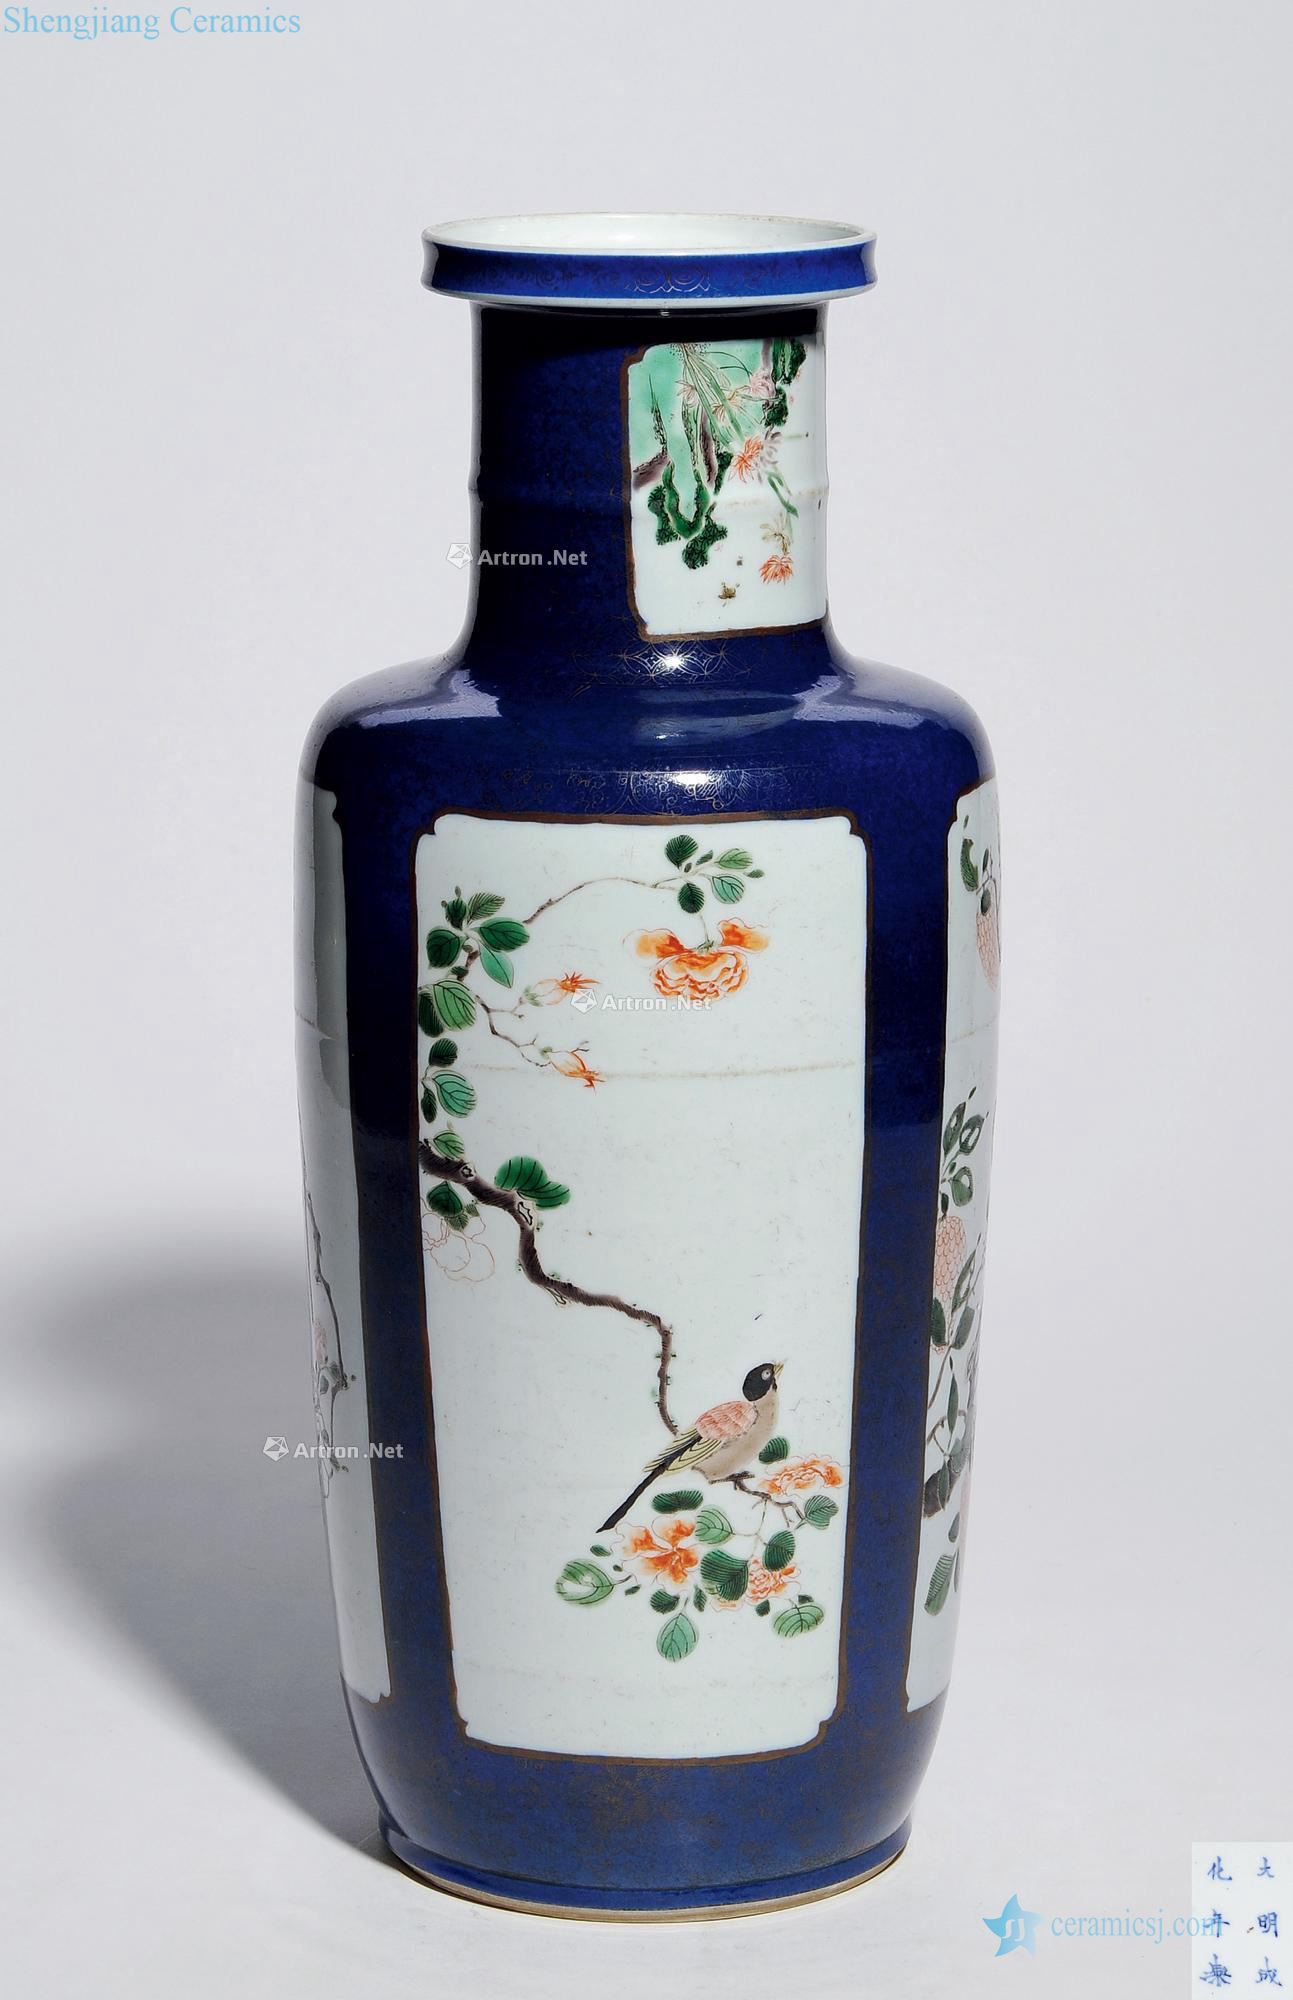 The qing emperor kangxi colorful paint lines were bottles with blue medallion and flowers and birds